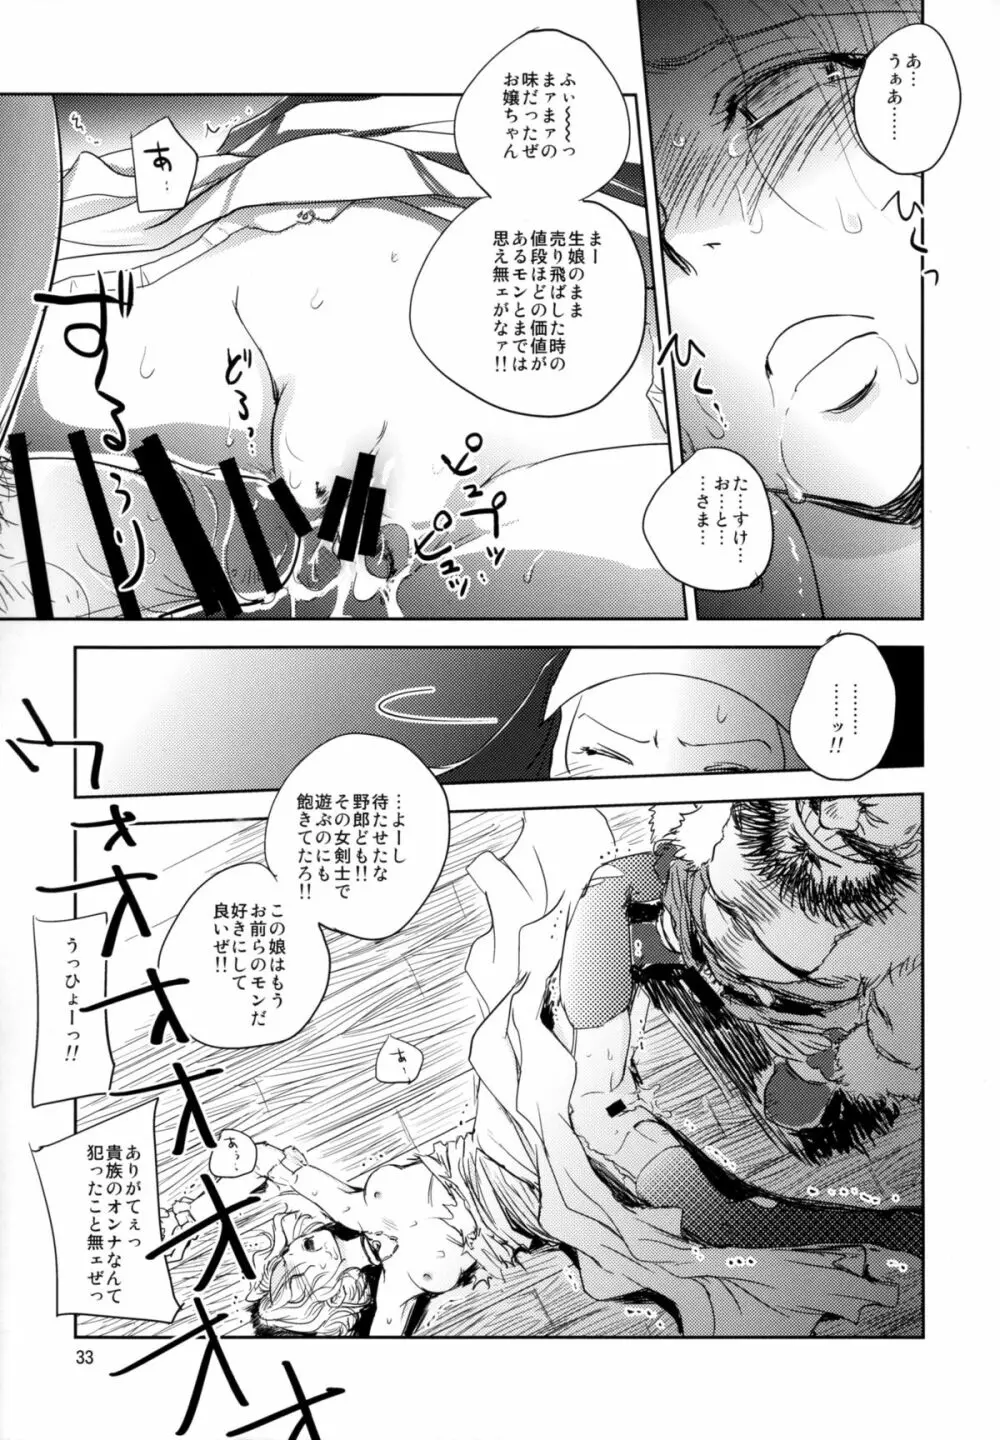 GRASSEN'S WAR ANOTHER STORY Ex #05 ノード侵攻 V Page.33